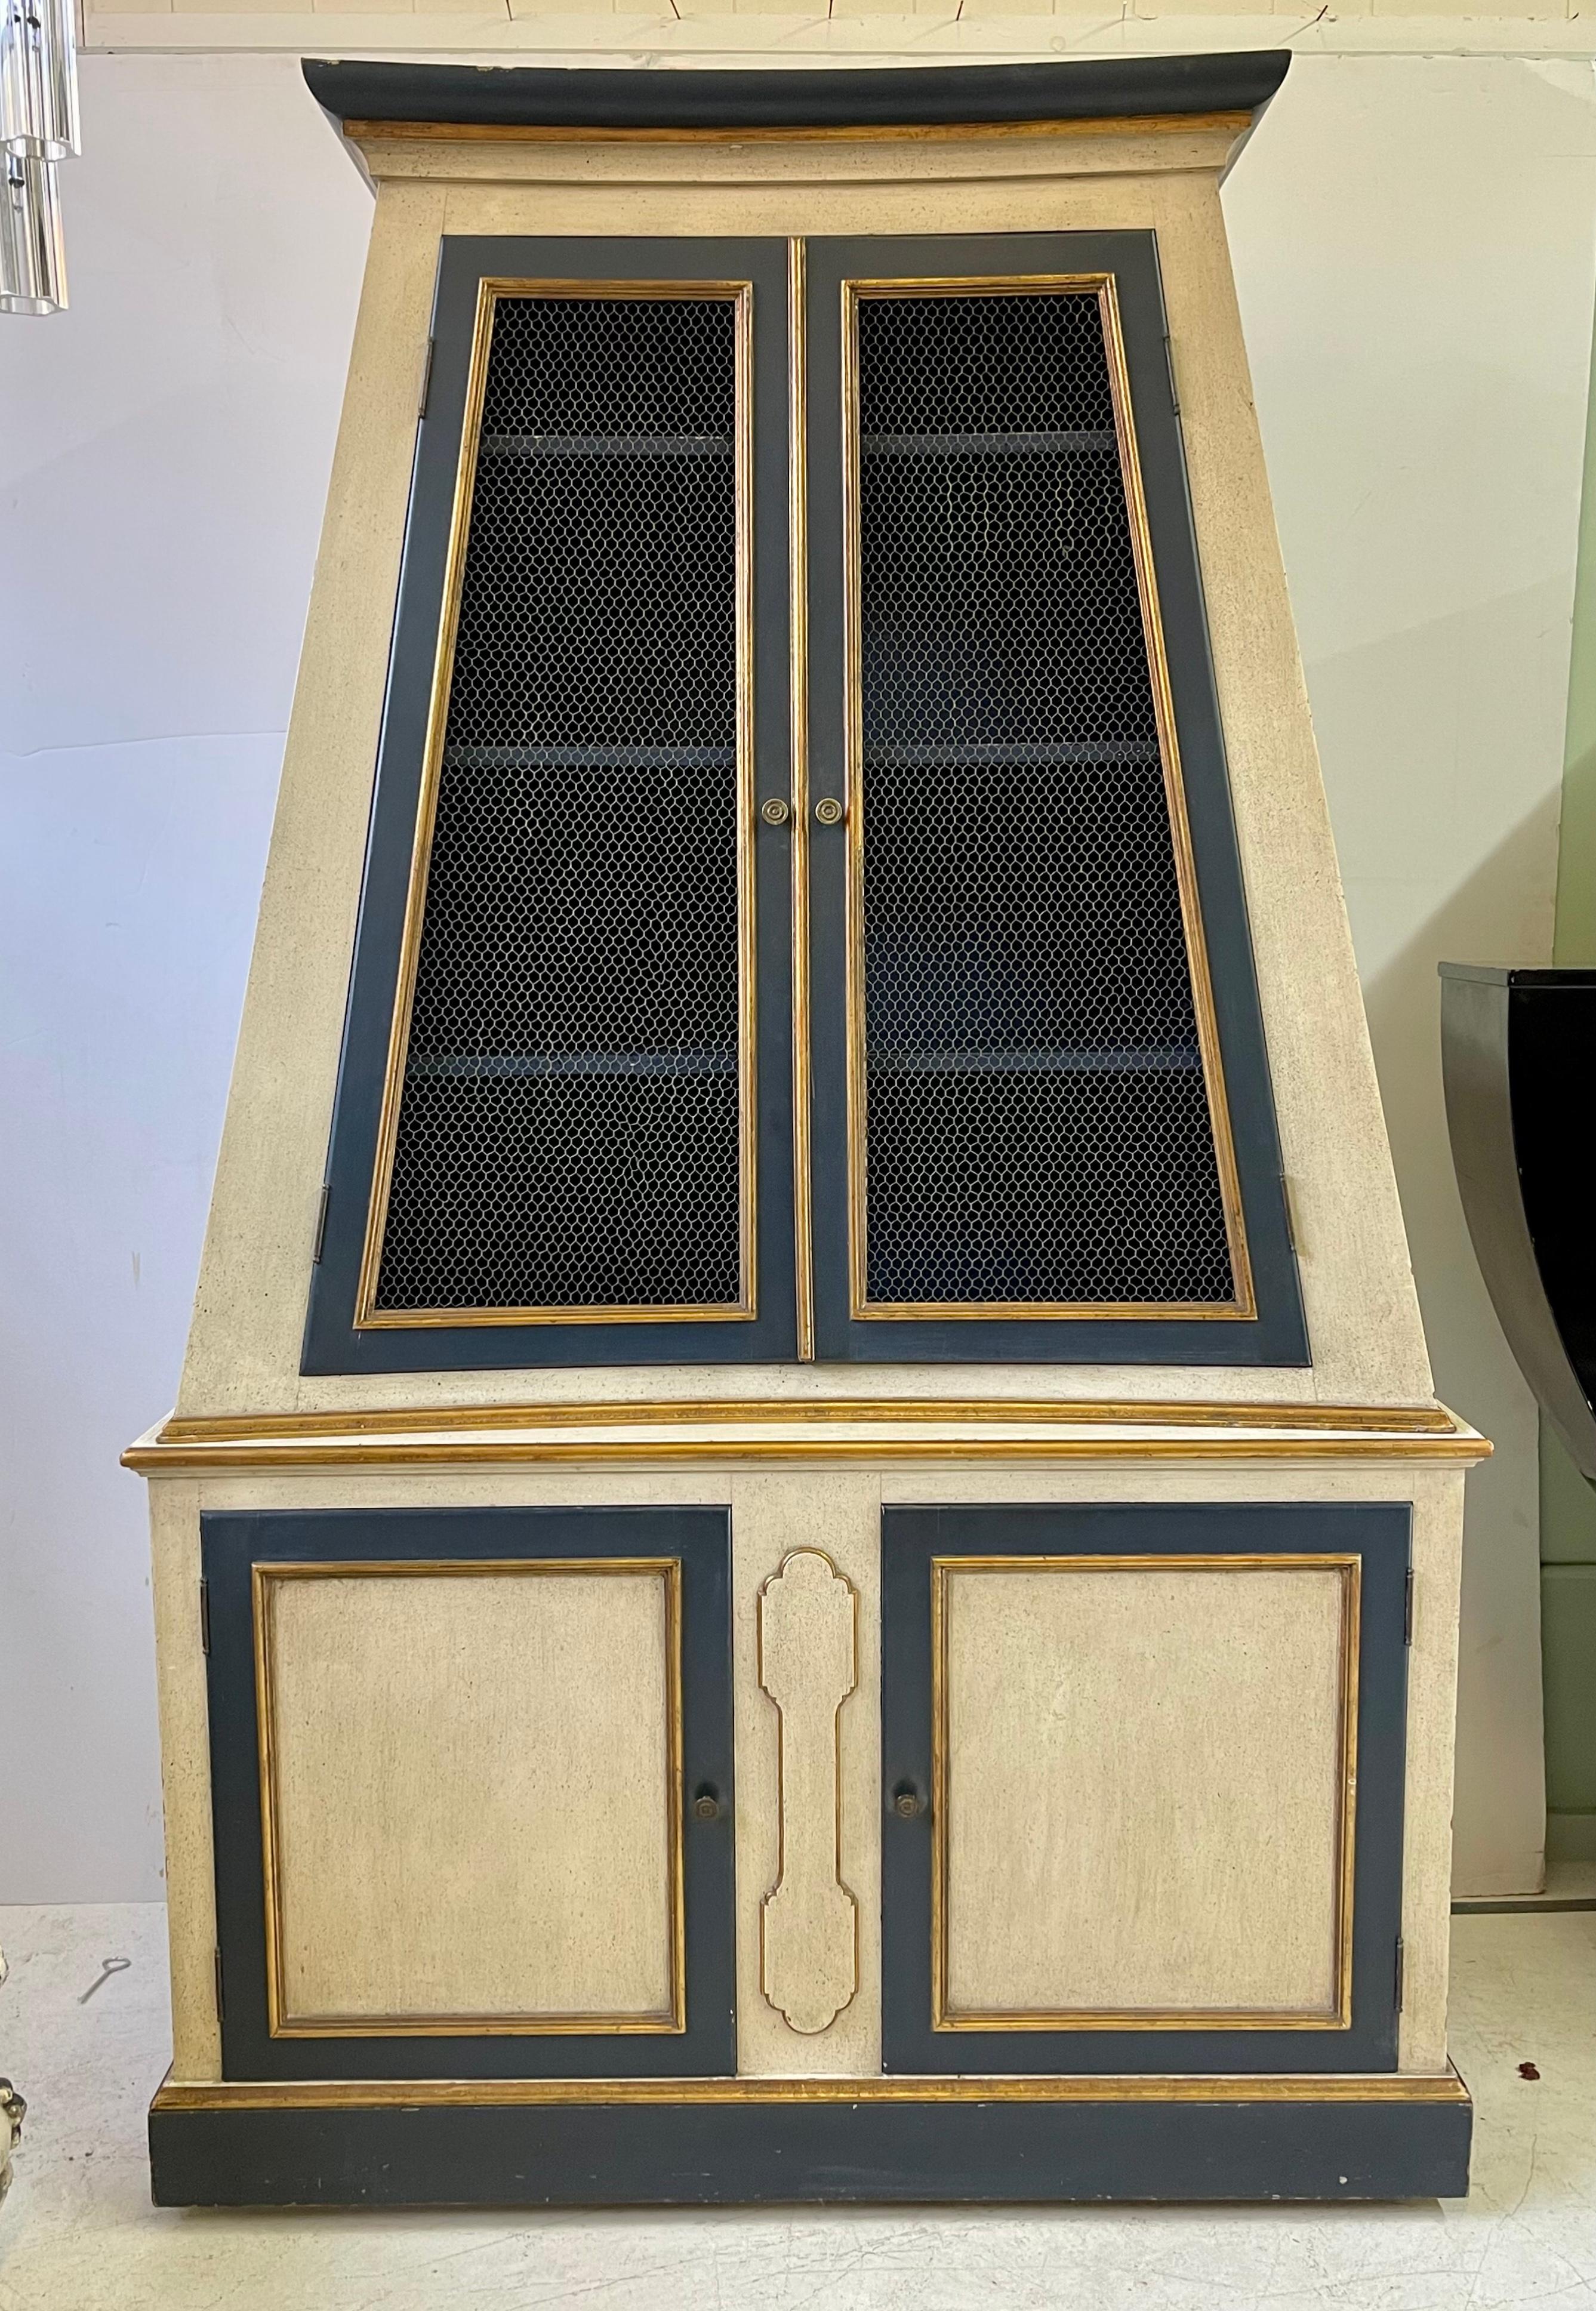 20th Century Neoclassical Italian Painted Pyramidal Cabinet with Giltwood Details For Sale